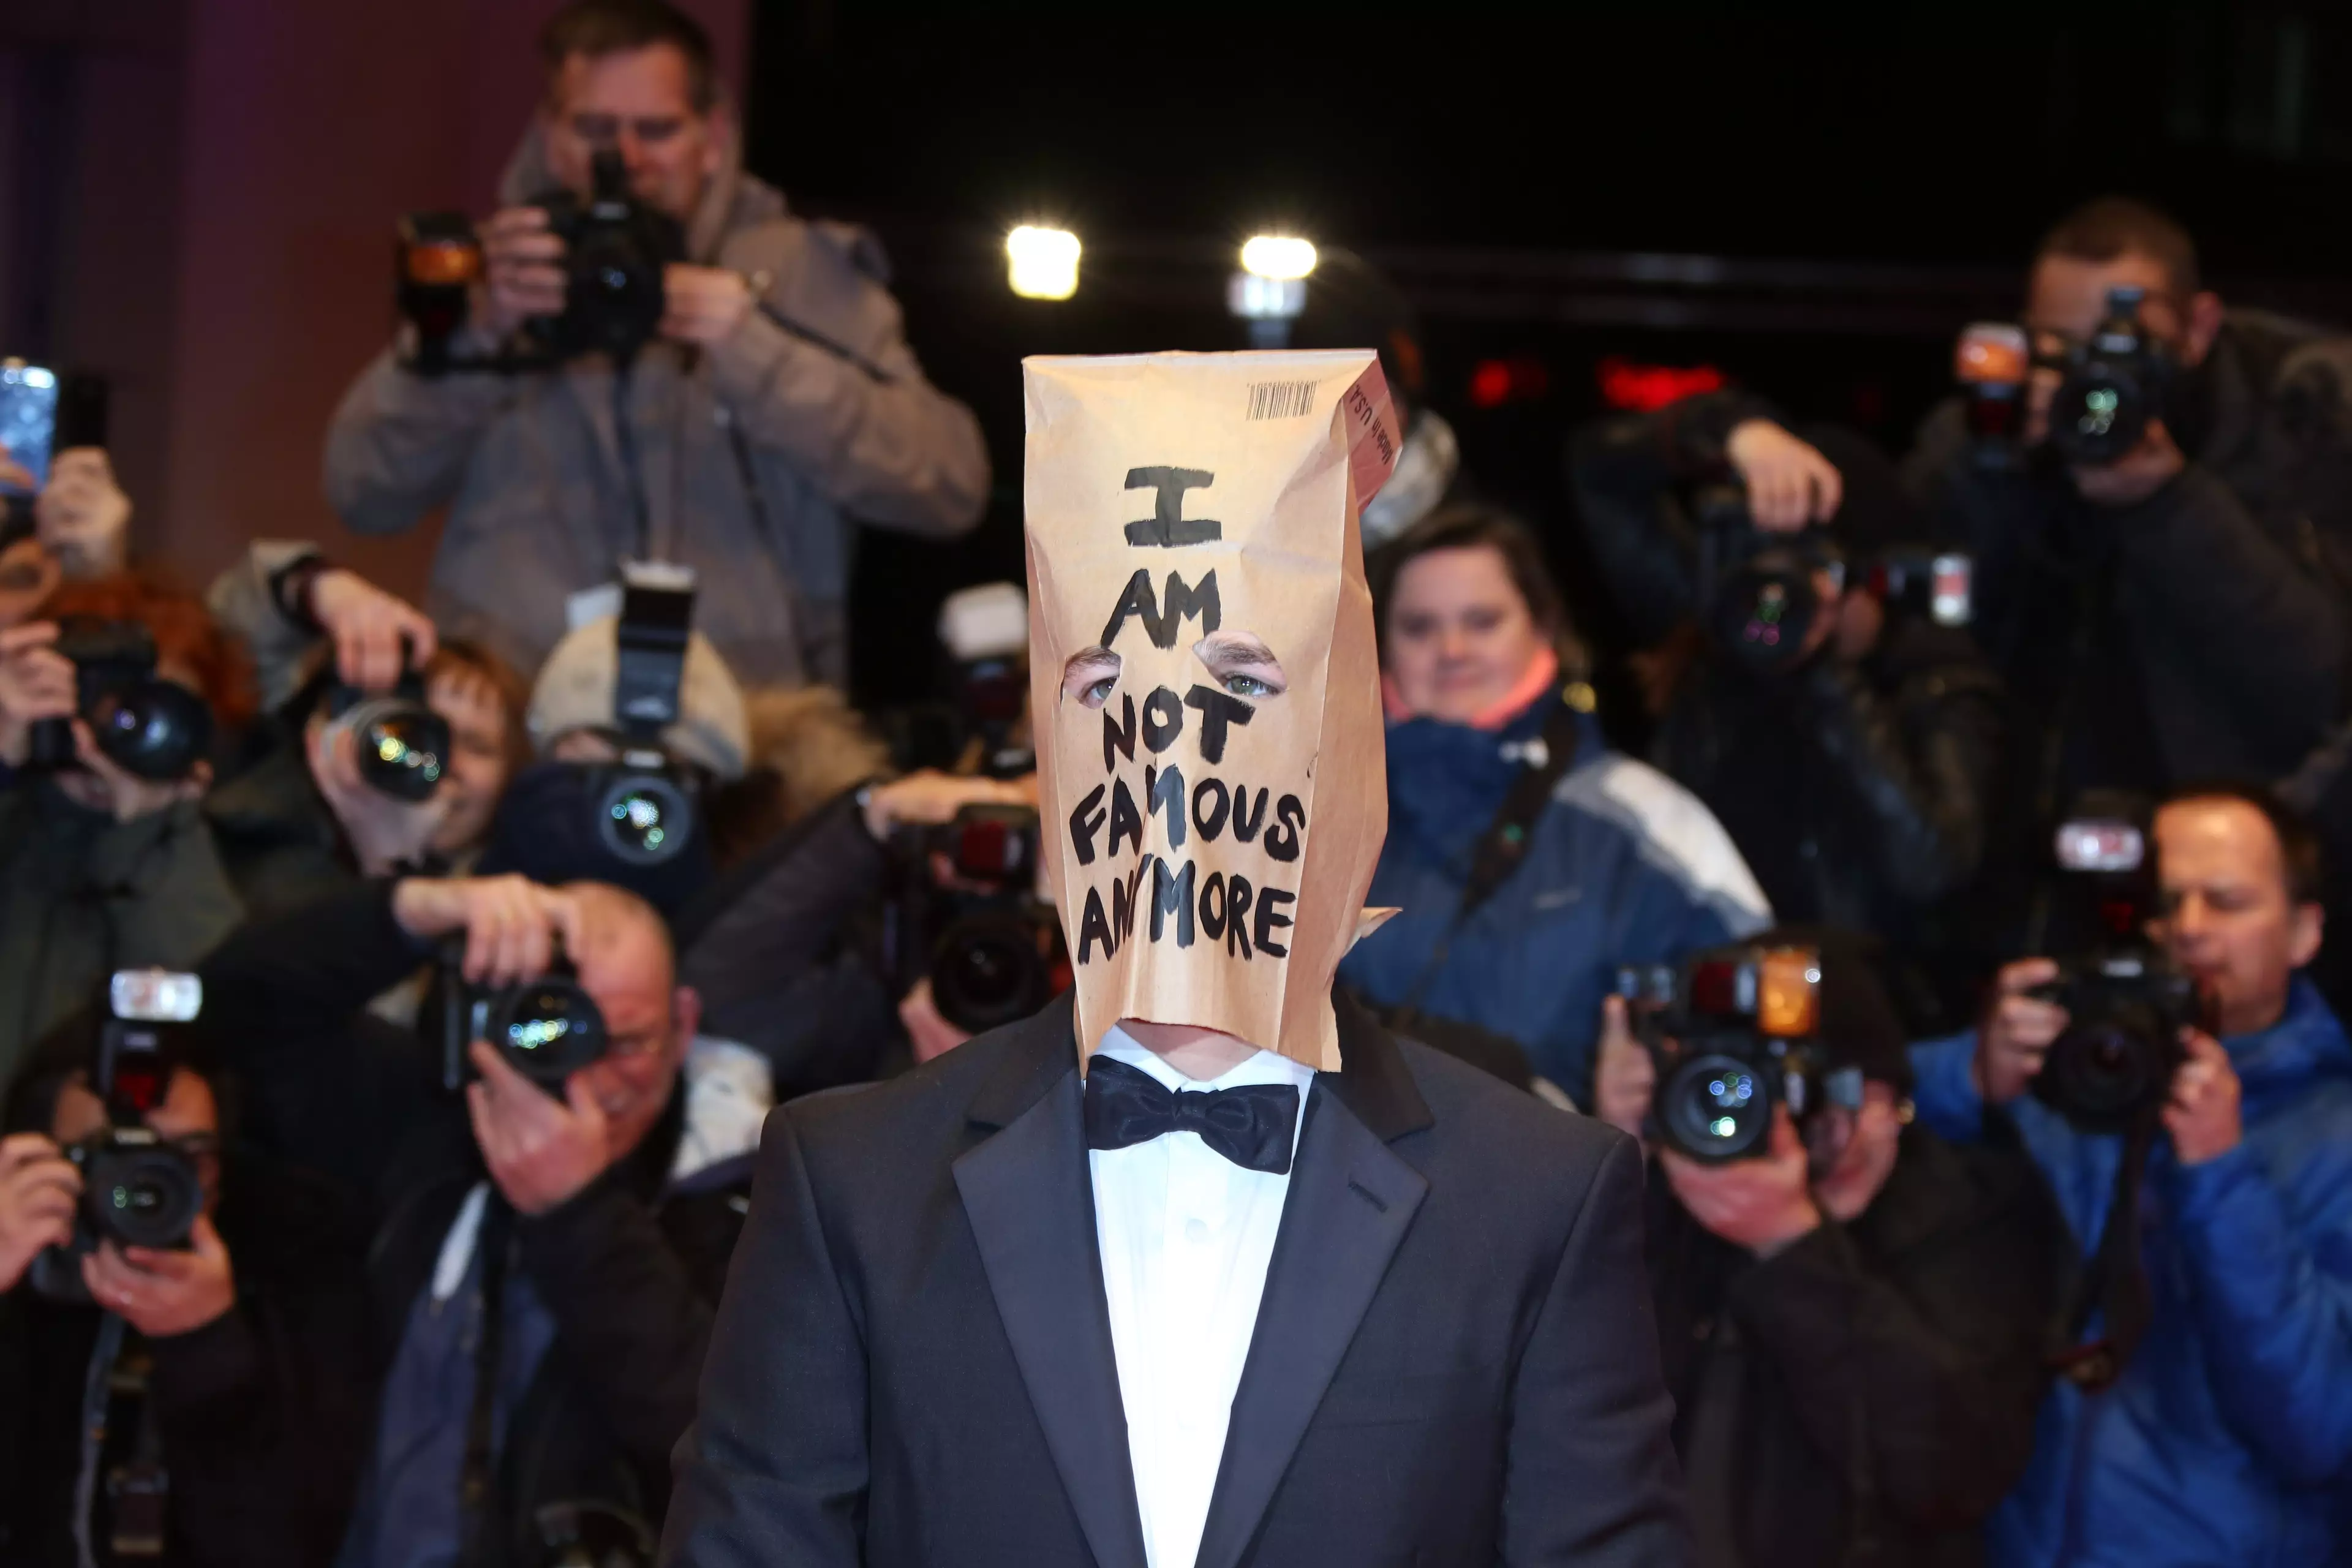 Shia with a bag on his head